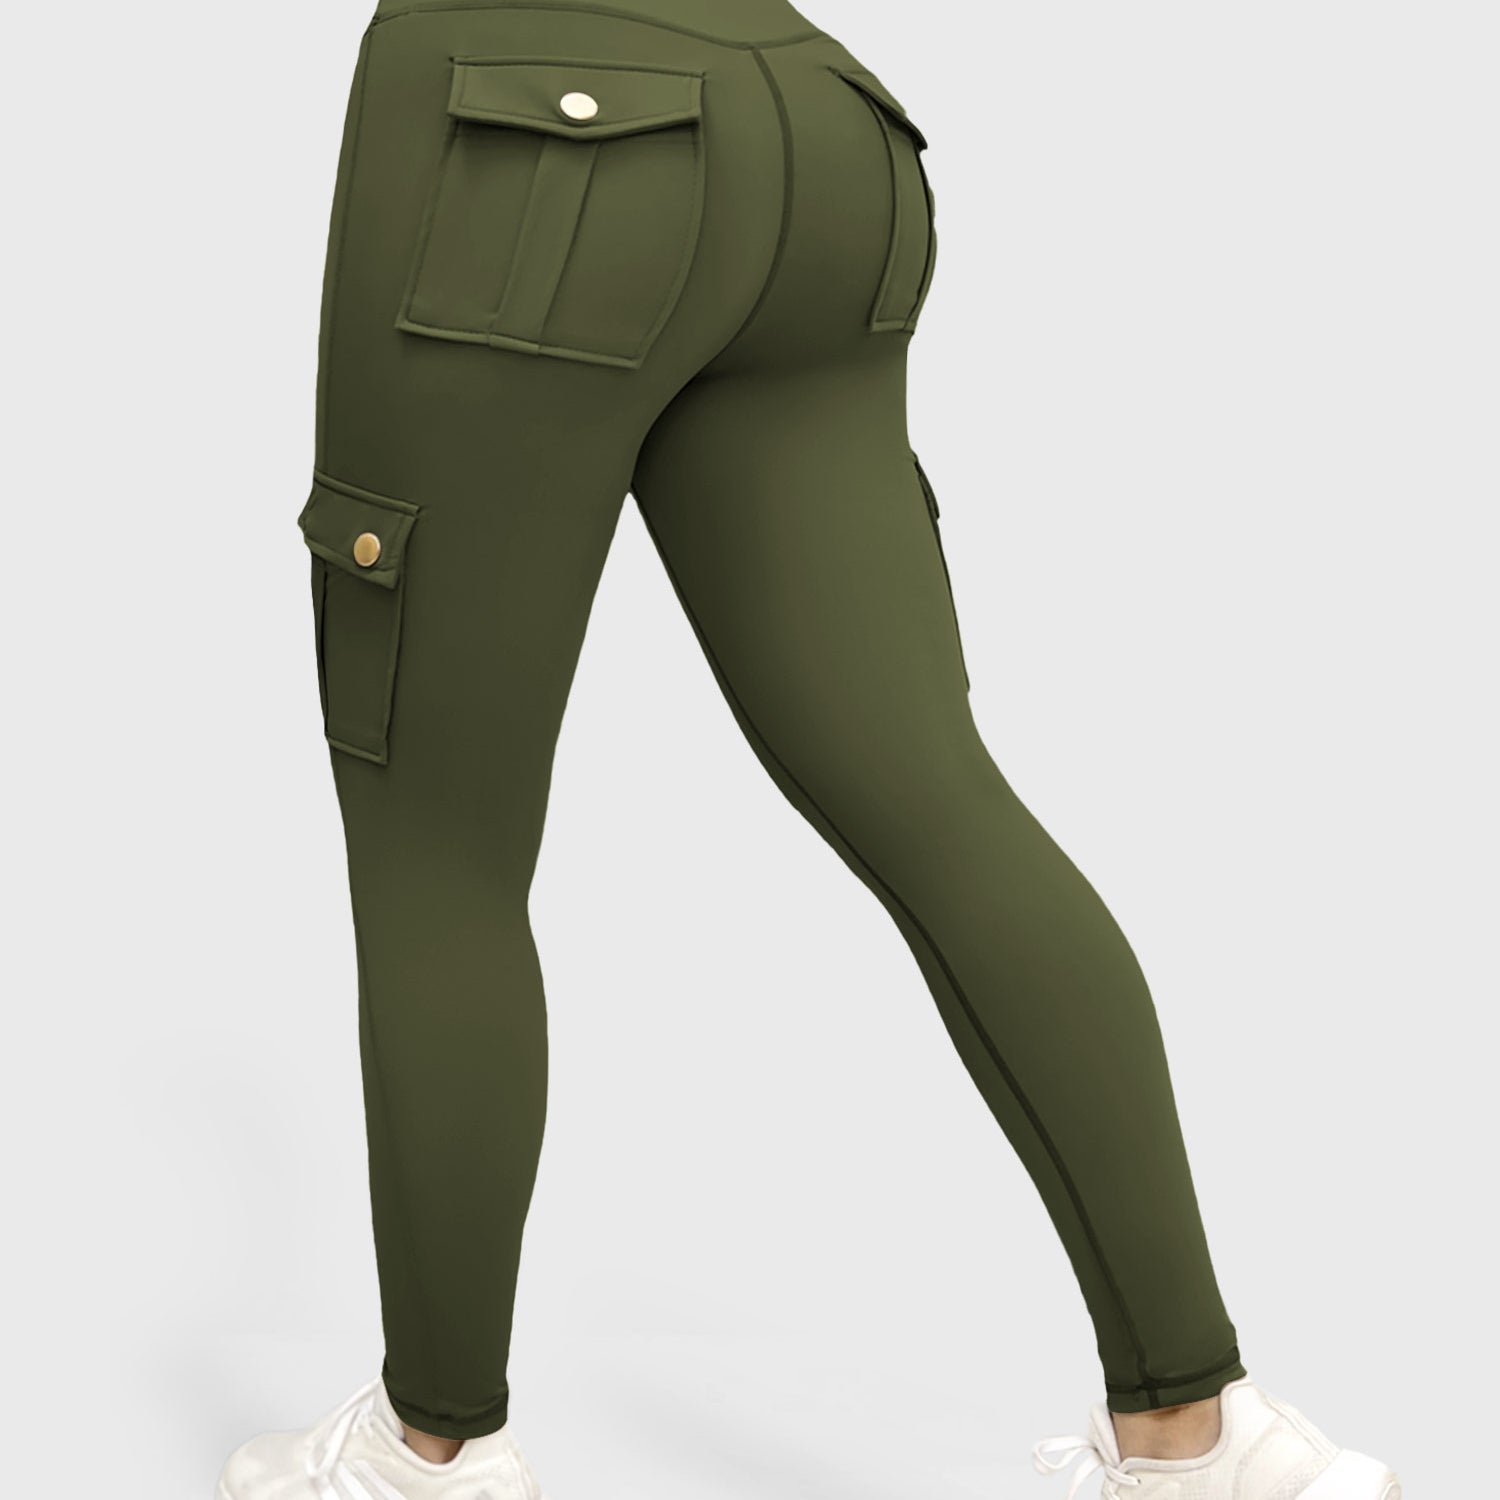 Yeoreo Cargo Workout Leggings with Pockets